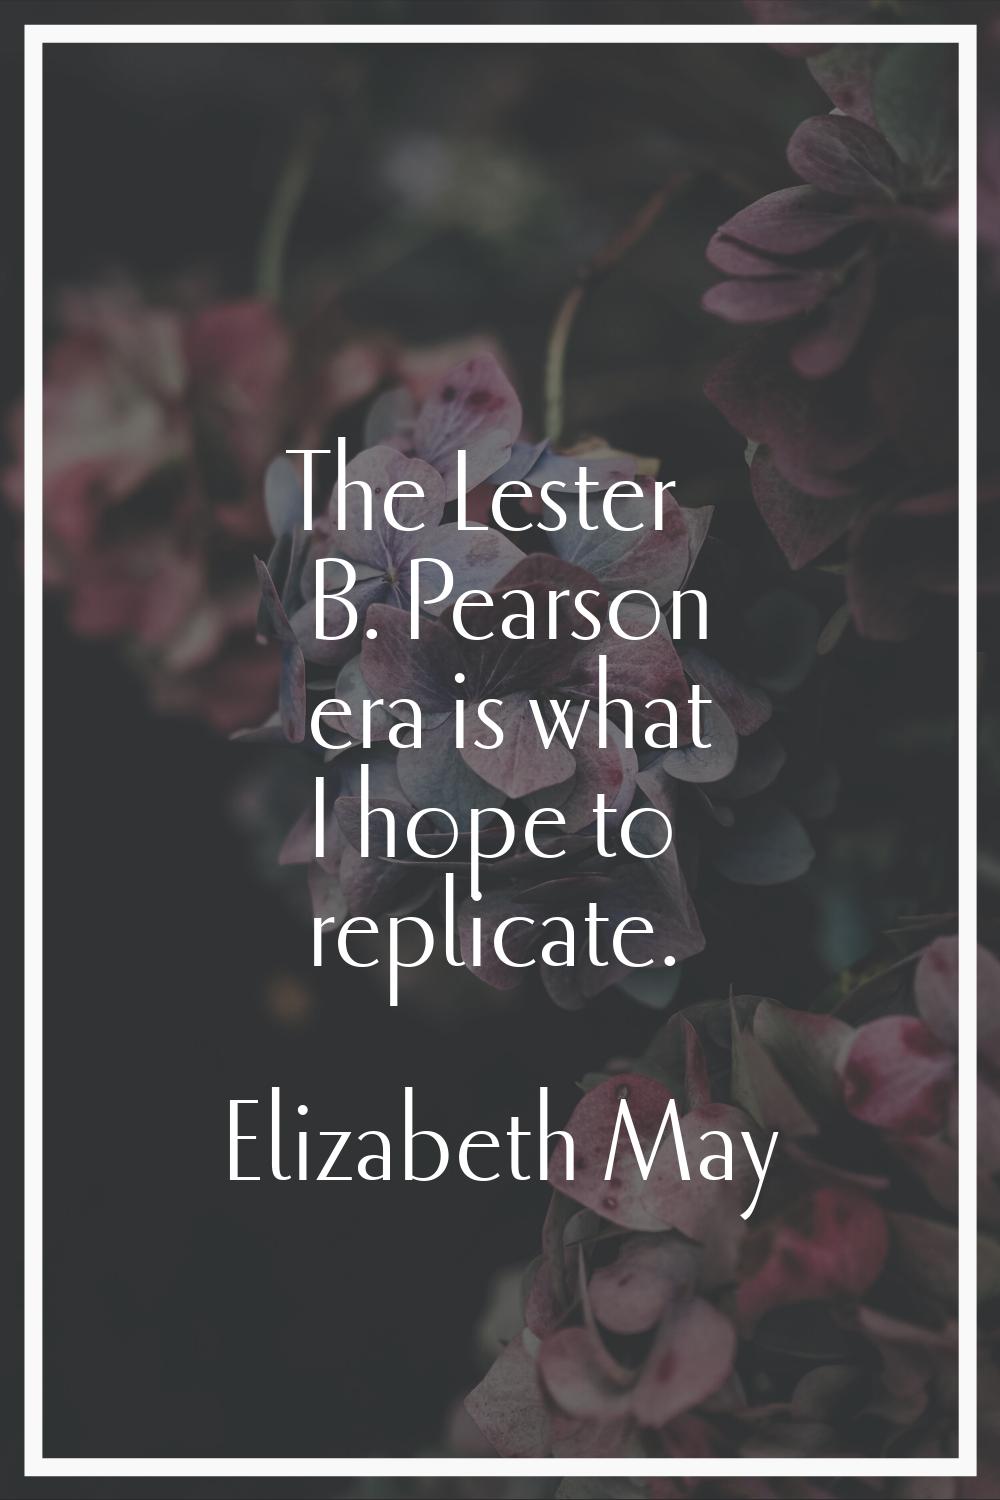 The Lester B. Pearson era is what I hope to replicate.